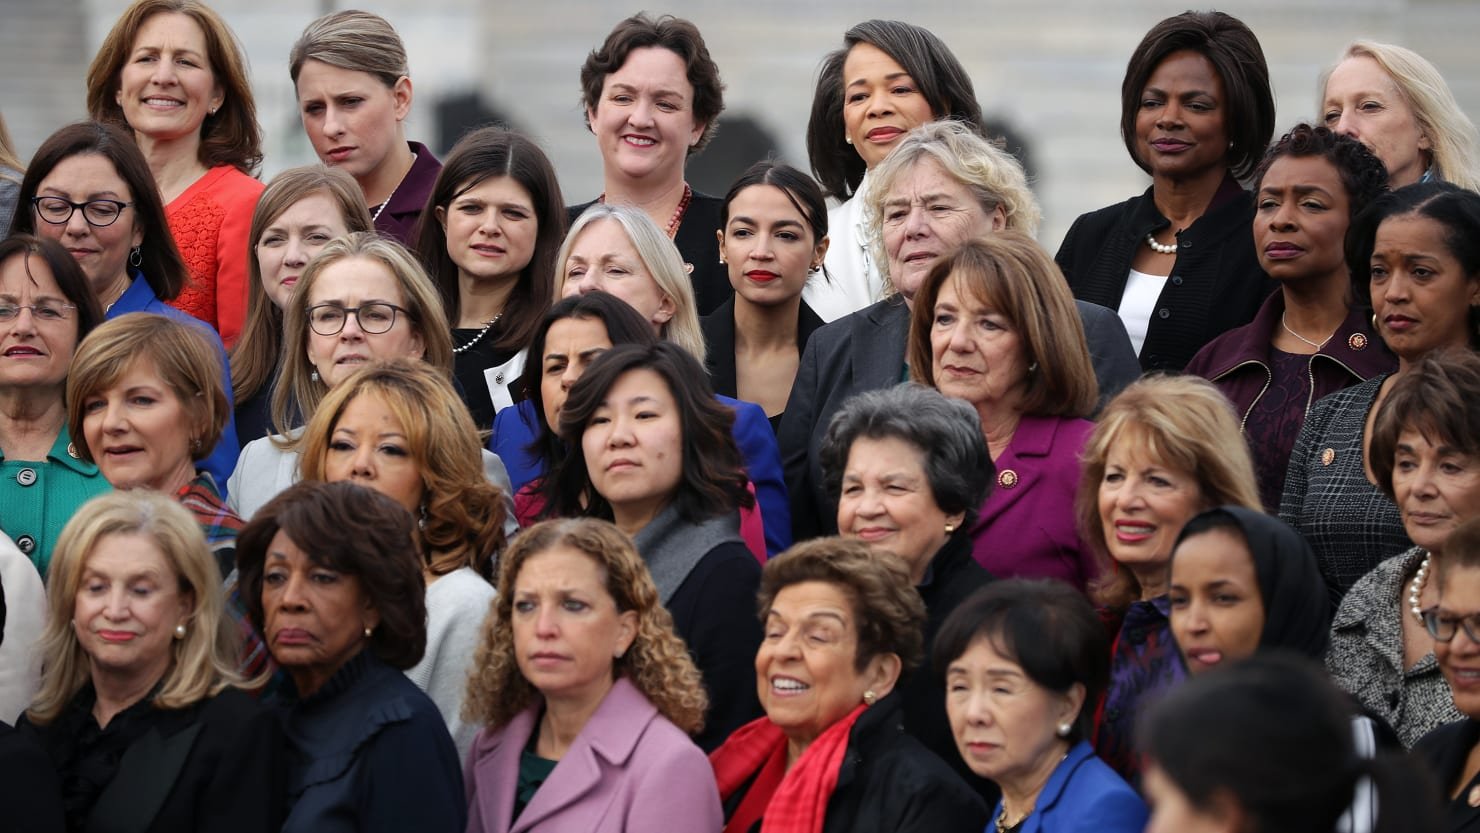 There’s an Exodus of Women Democrats From Congress, While the GOP Makes Gains